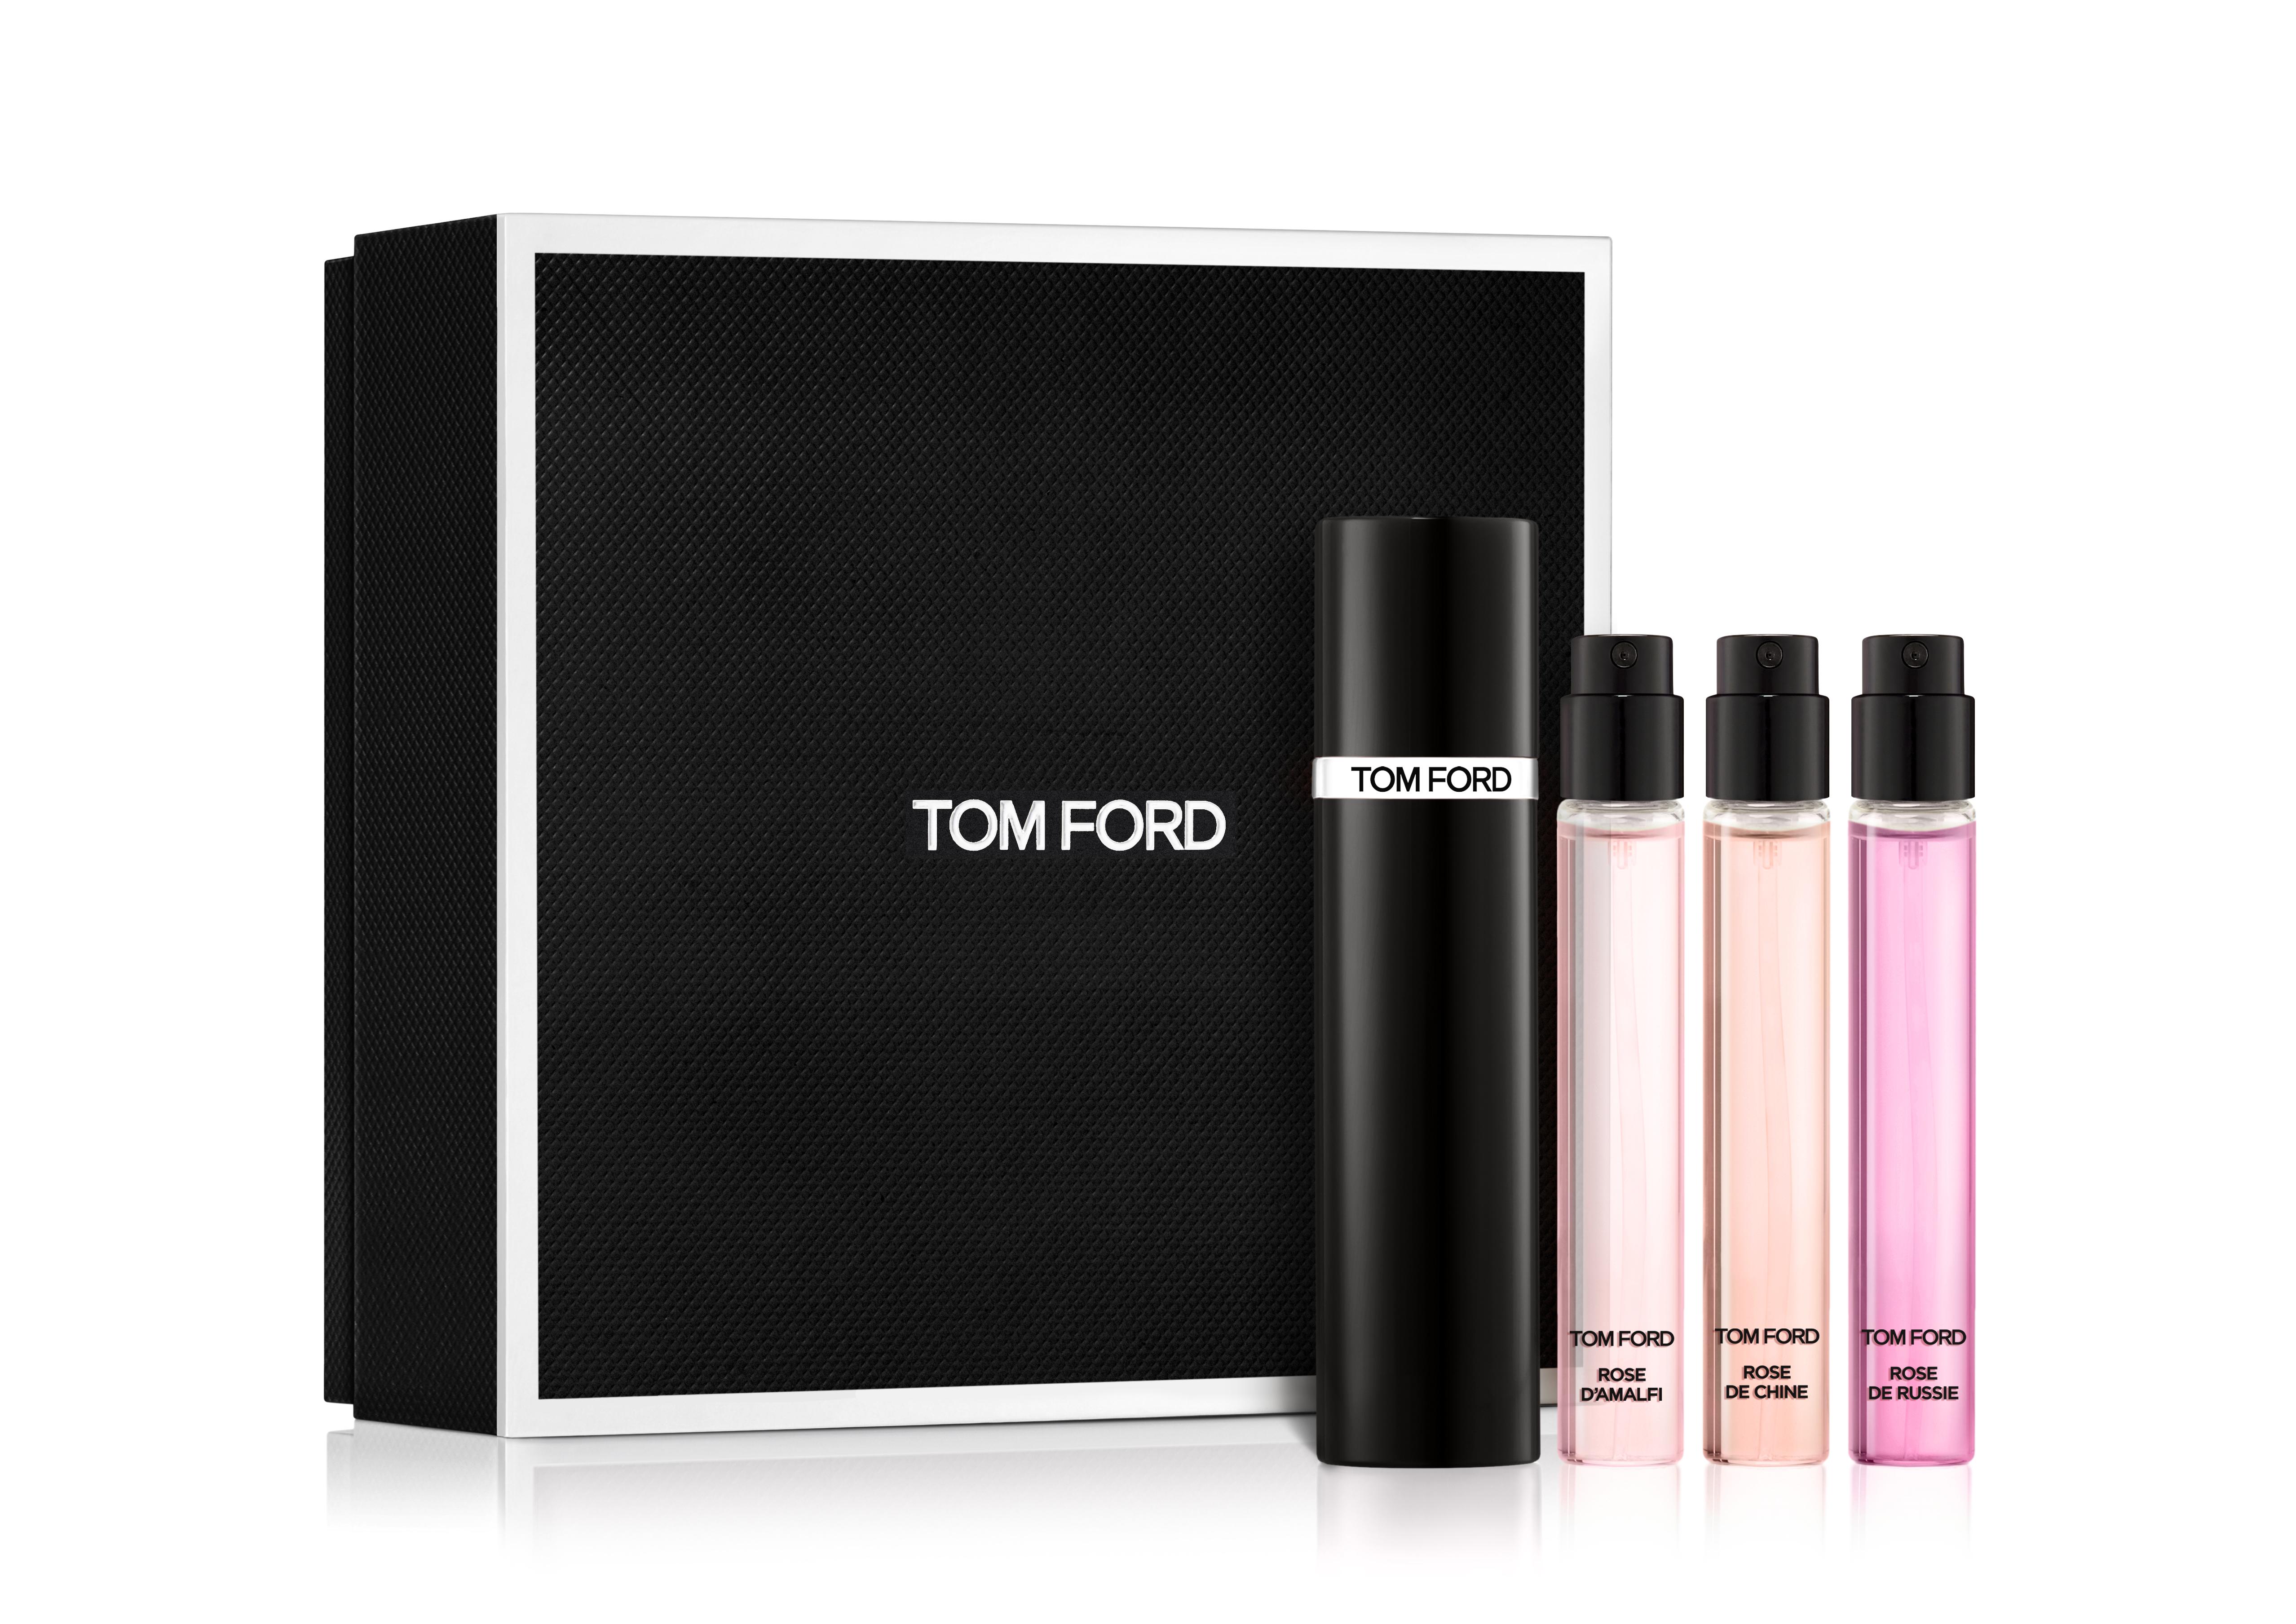 Tom Ford PRIVATE BLEND ROSES EAU DE PARFUM TRAVEL COLLECTION WITH ATOMIZER  